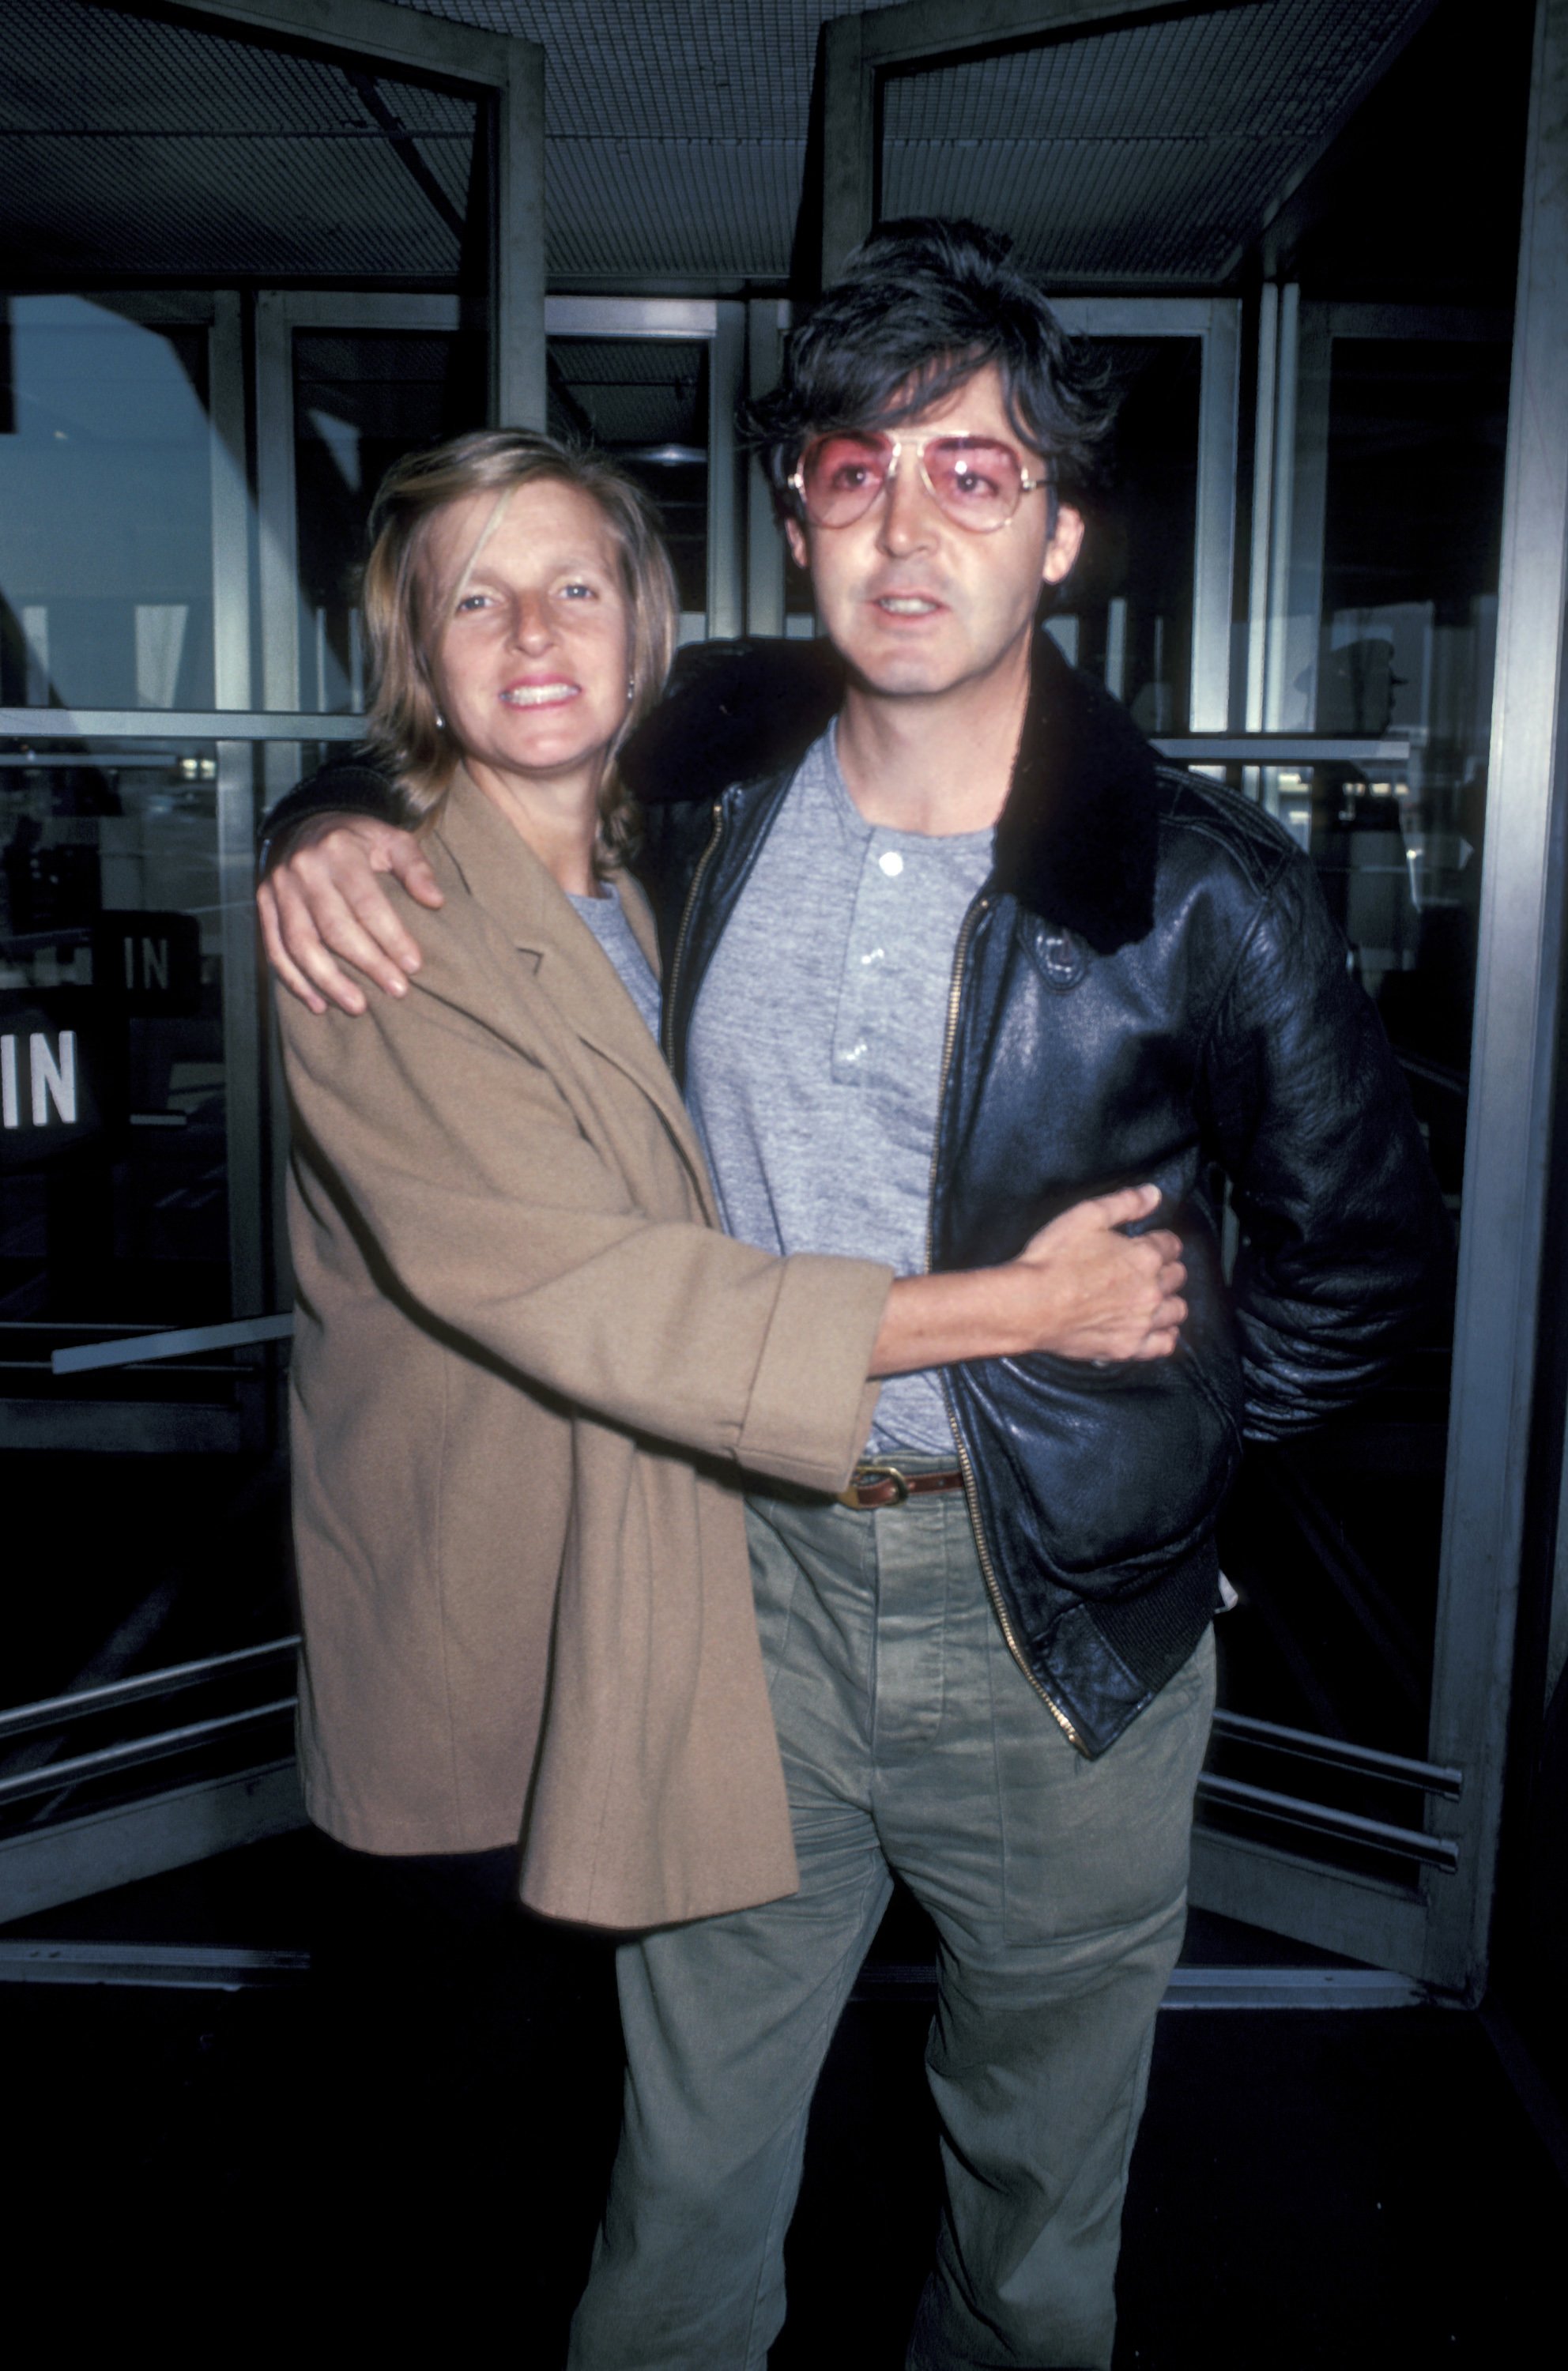 Linda McCartney and Paul McCartney on October 28, 1982 at Kennedy Airport in New York City, New York, United States | Source: Getty Images